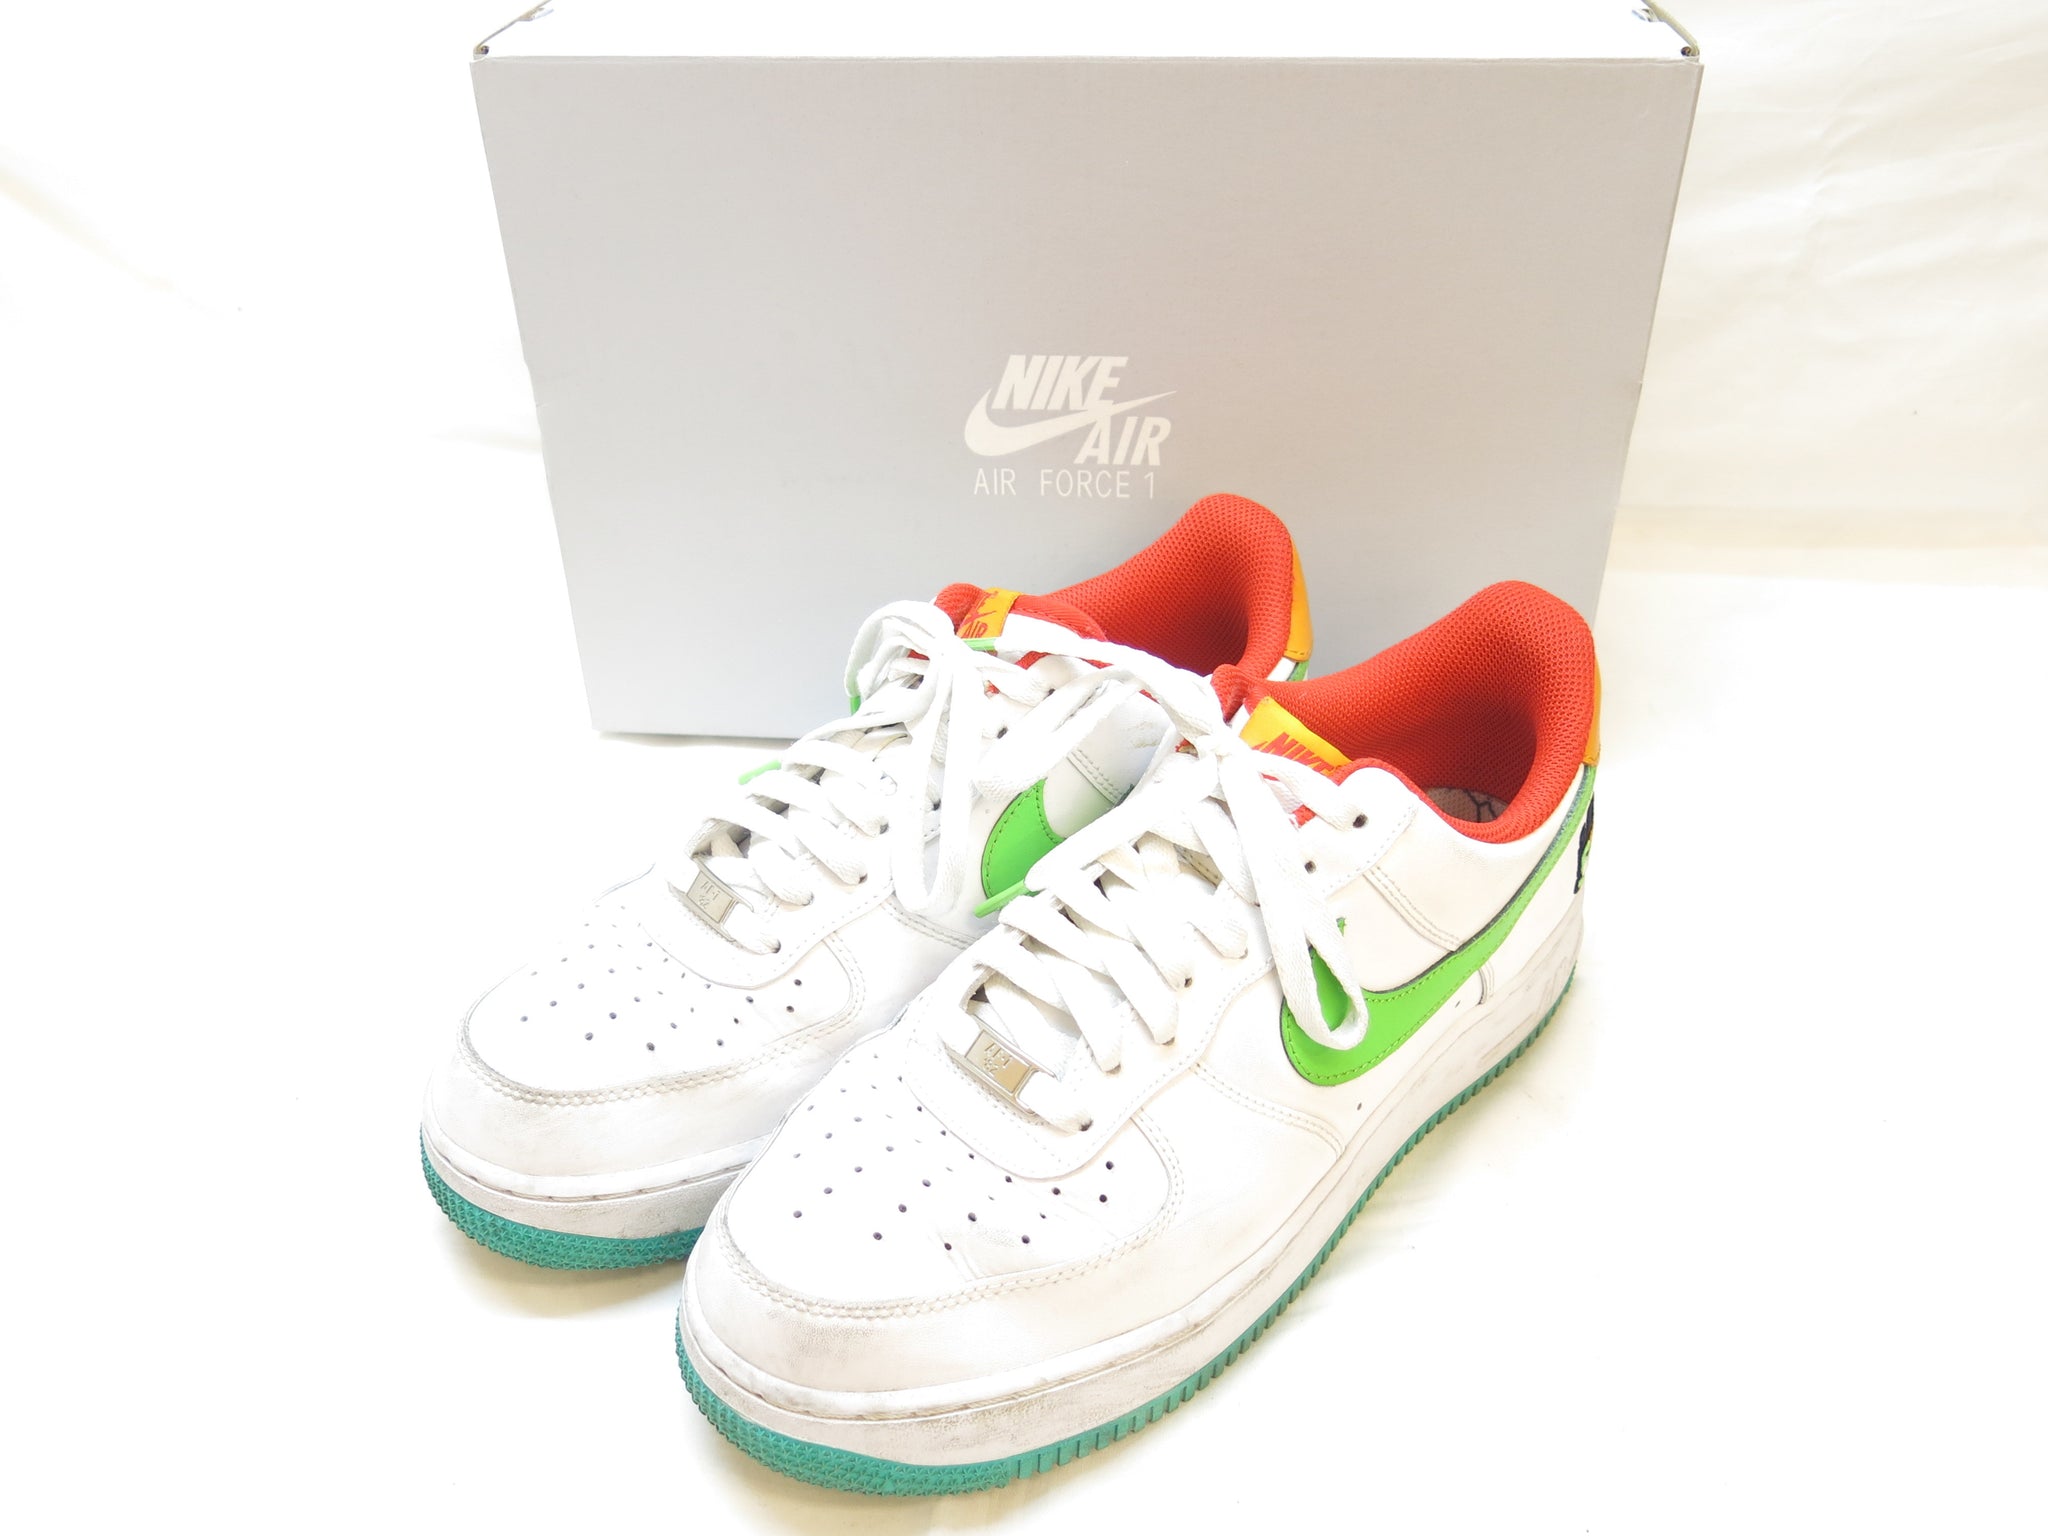 NIKE AIR FORCE 1 SBY エアフォースワン